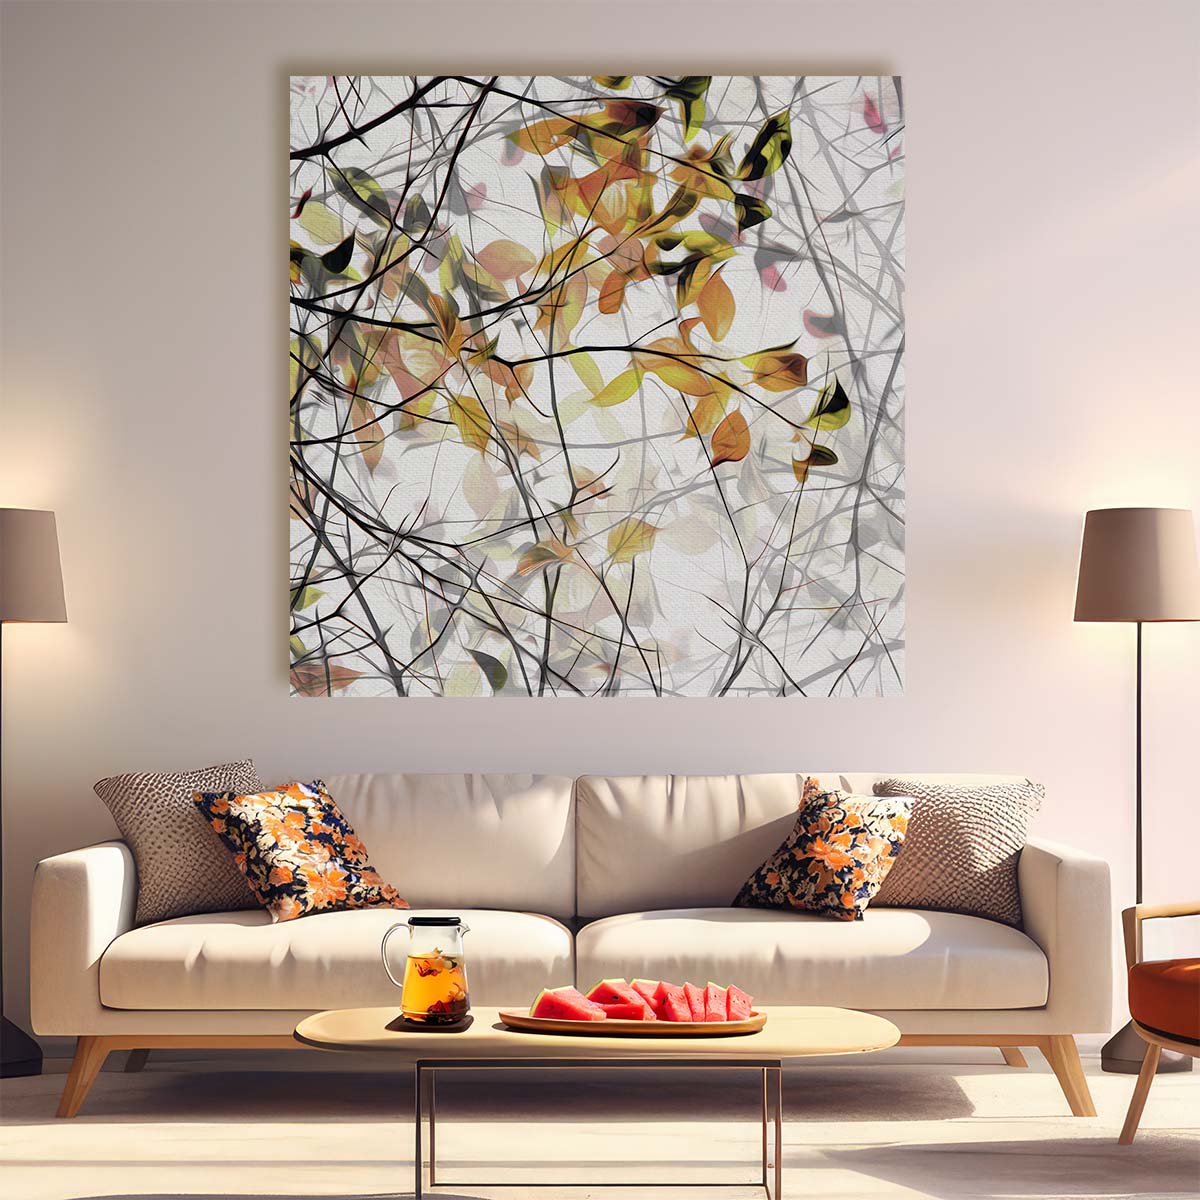 Autumn Leaves & Twigs Creative Edit Wall Art by Luxuriance Designs. Made in USA.